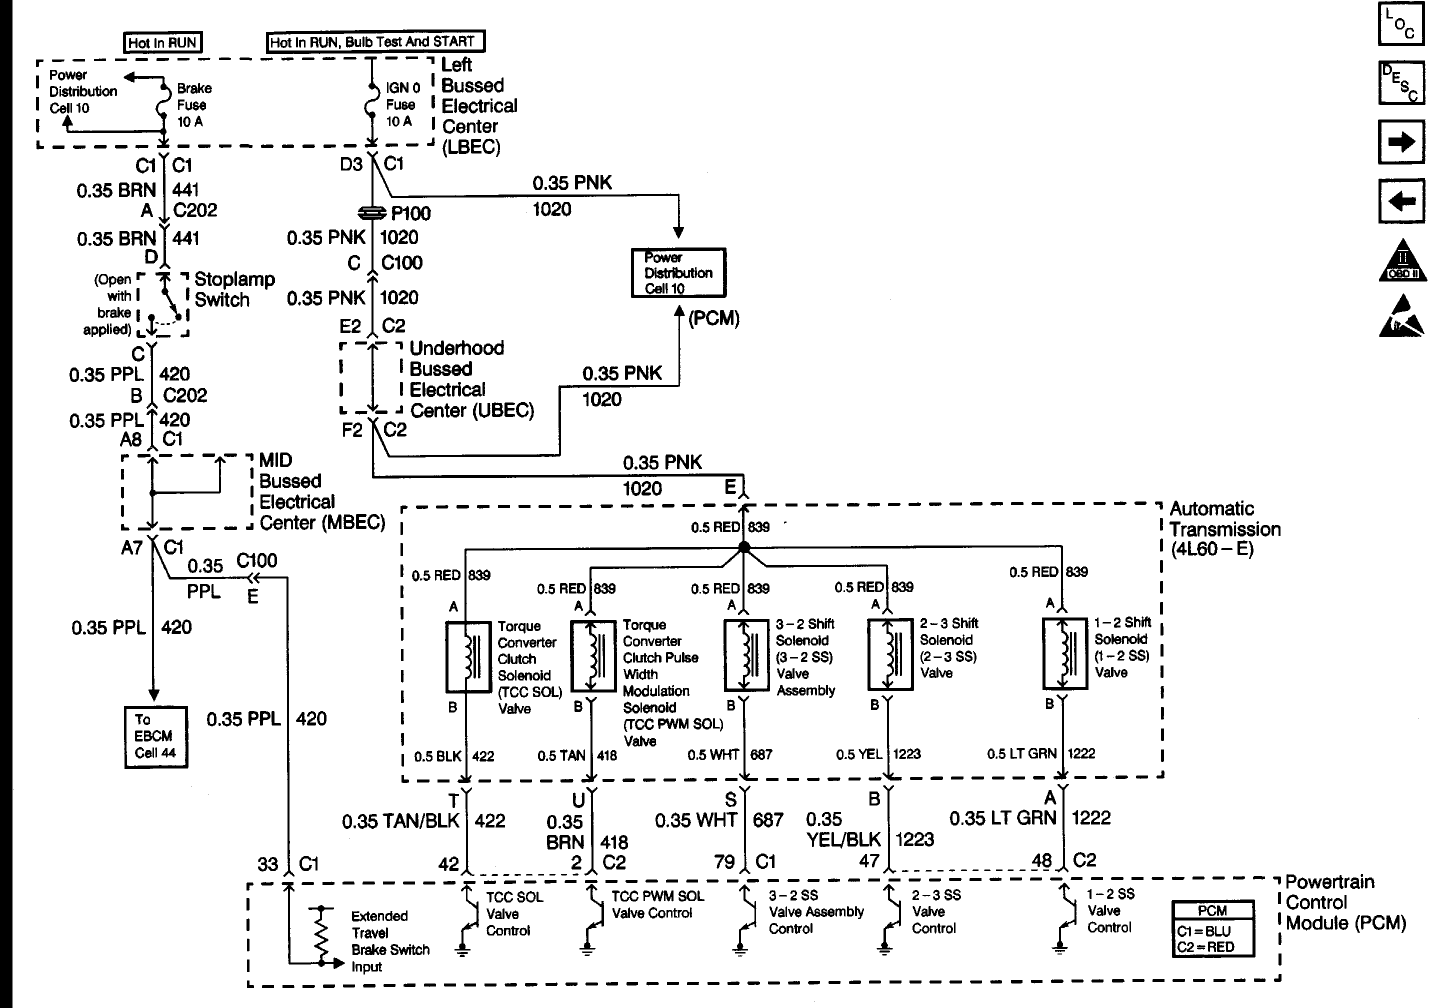 Wiring Schematic for 1999 GMC Sierra 1500 [Specifically up and down